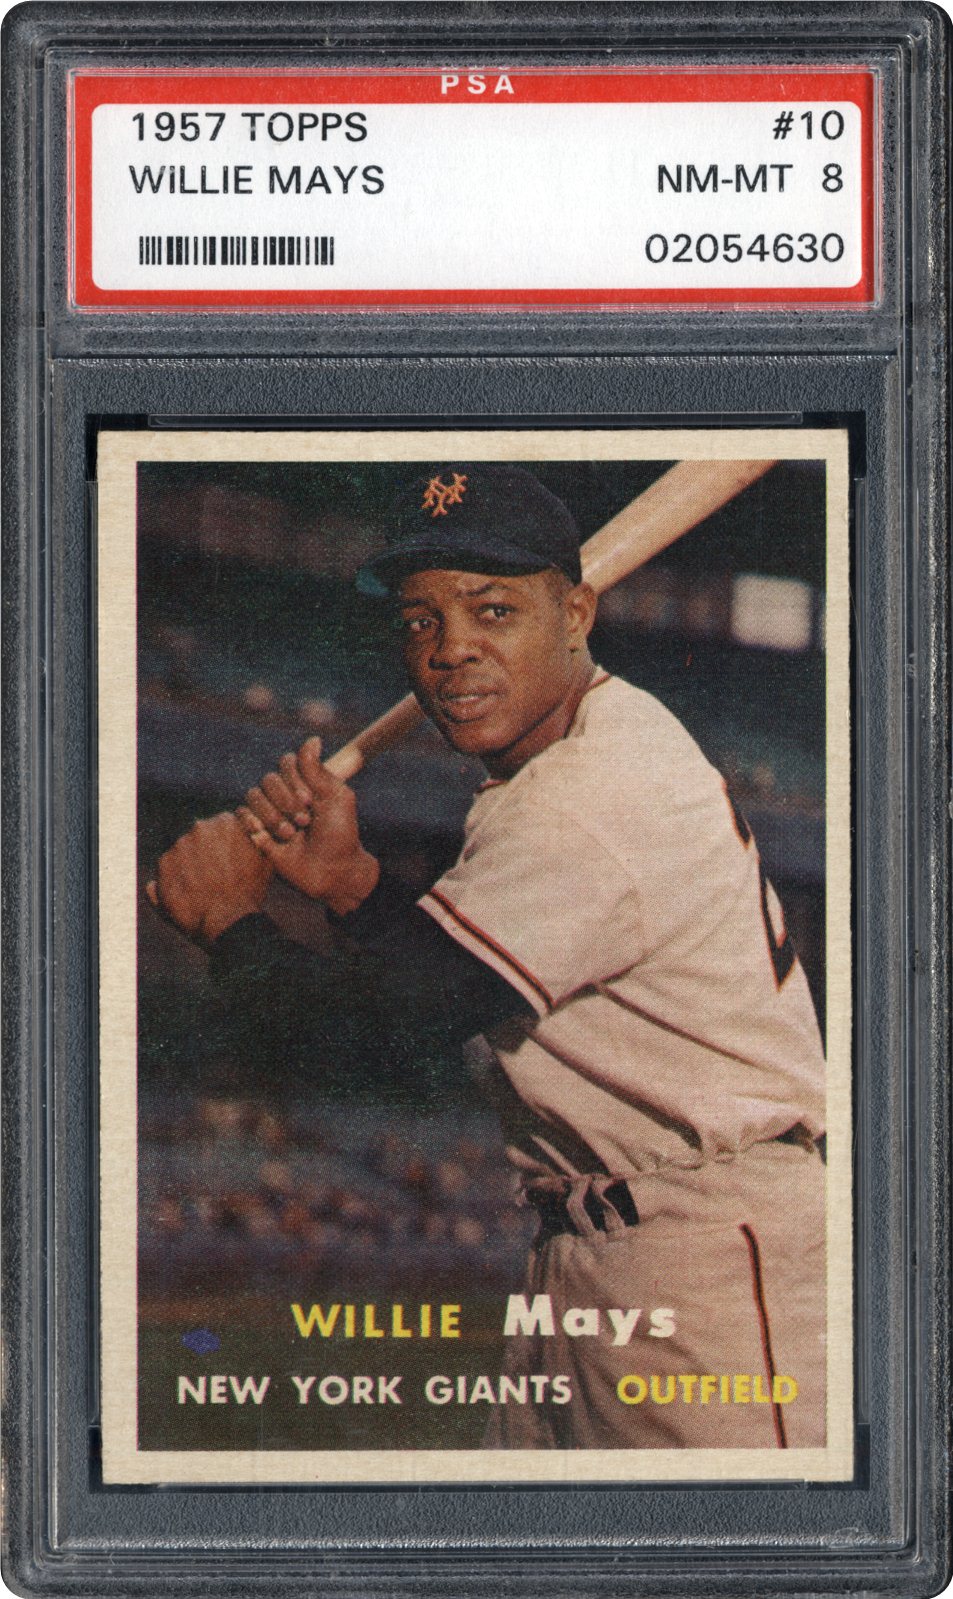 1957 Topps Willie Mays PSA CardFacts™